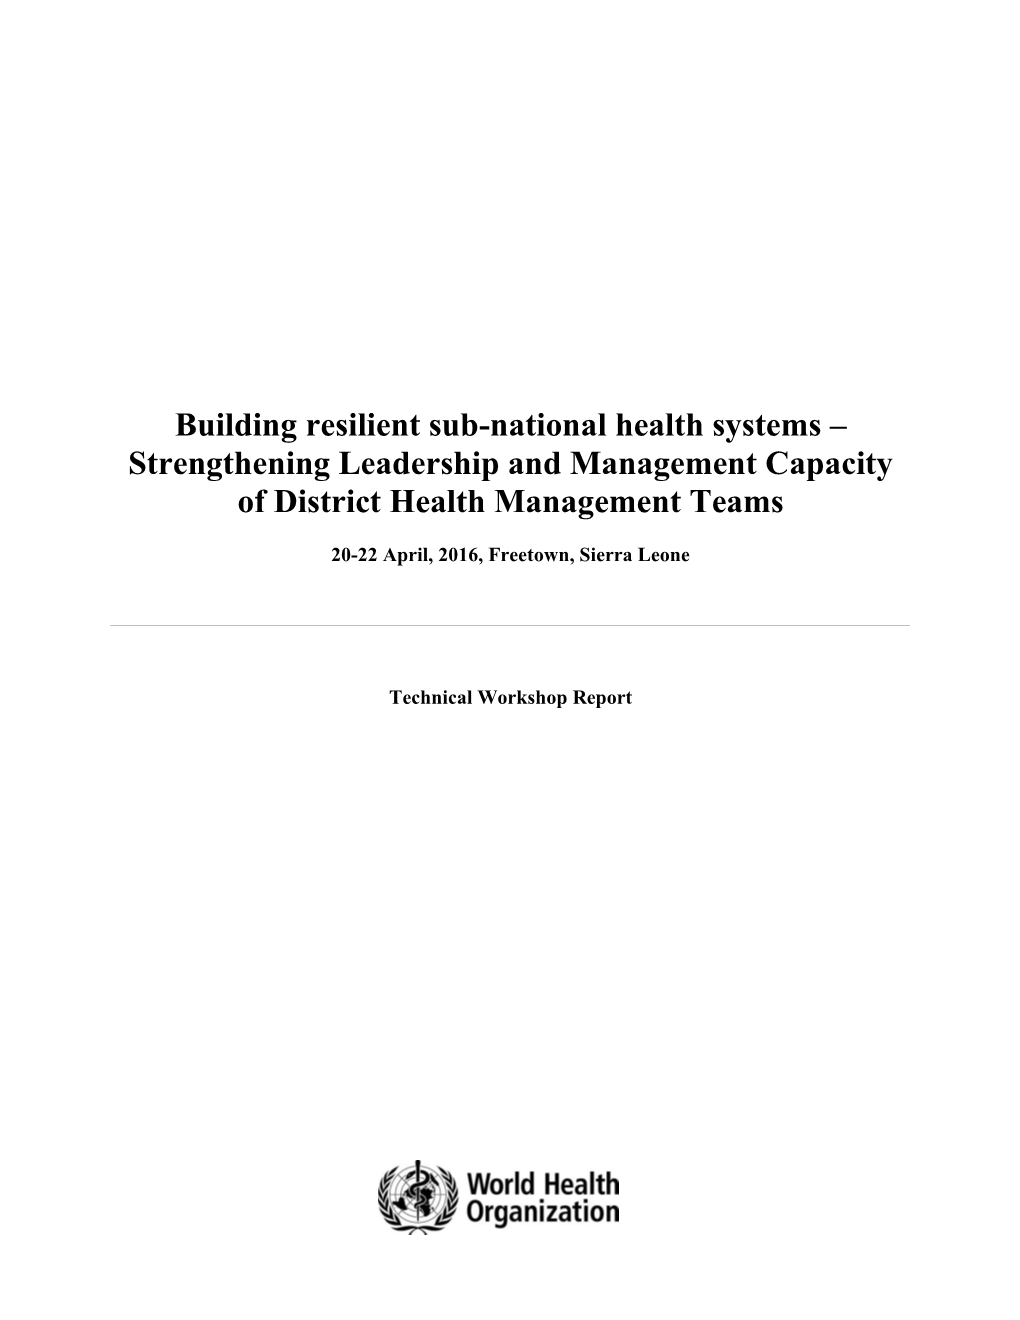 Building Resilient Sub-National Health Systems – Strengthening Leadership and Management Capacity of District Health Management Teams